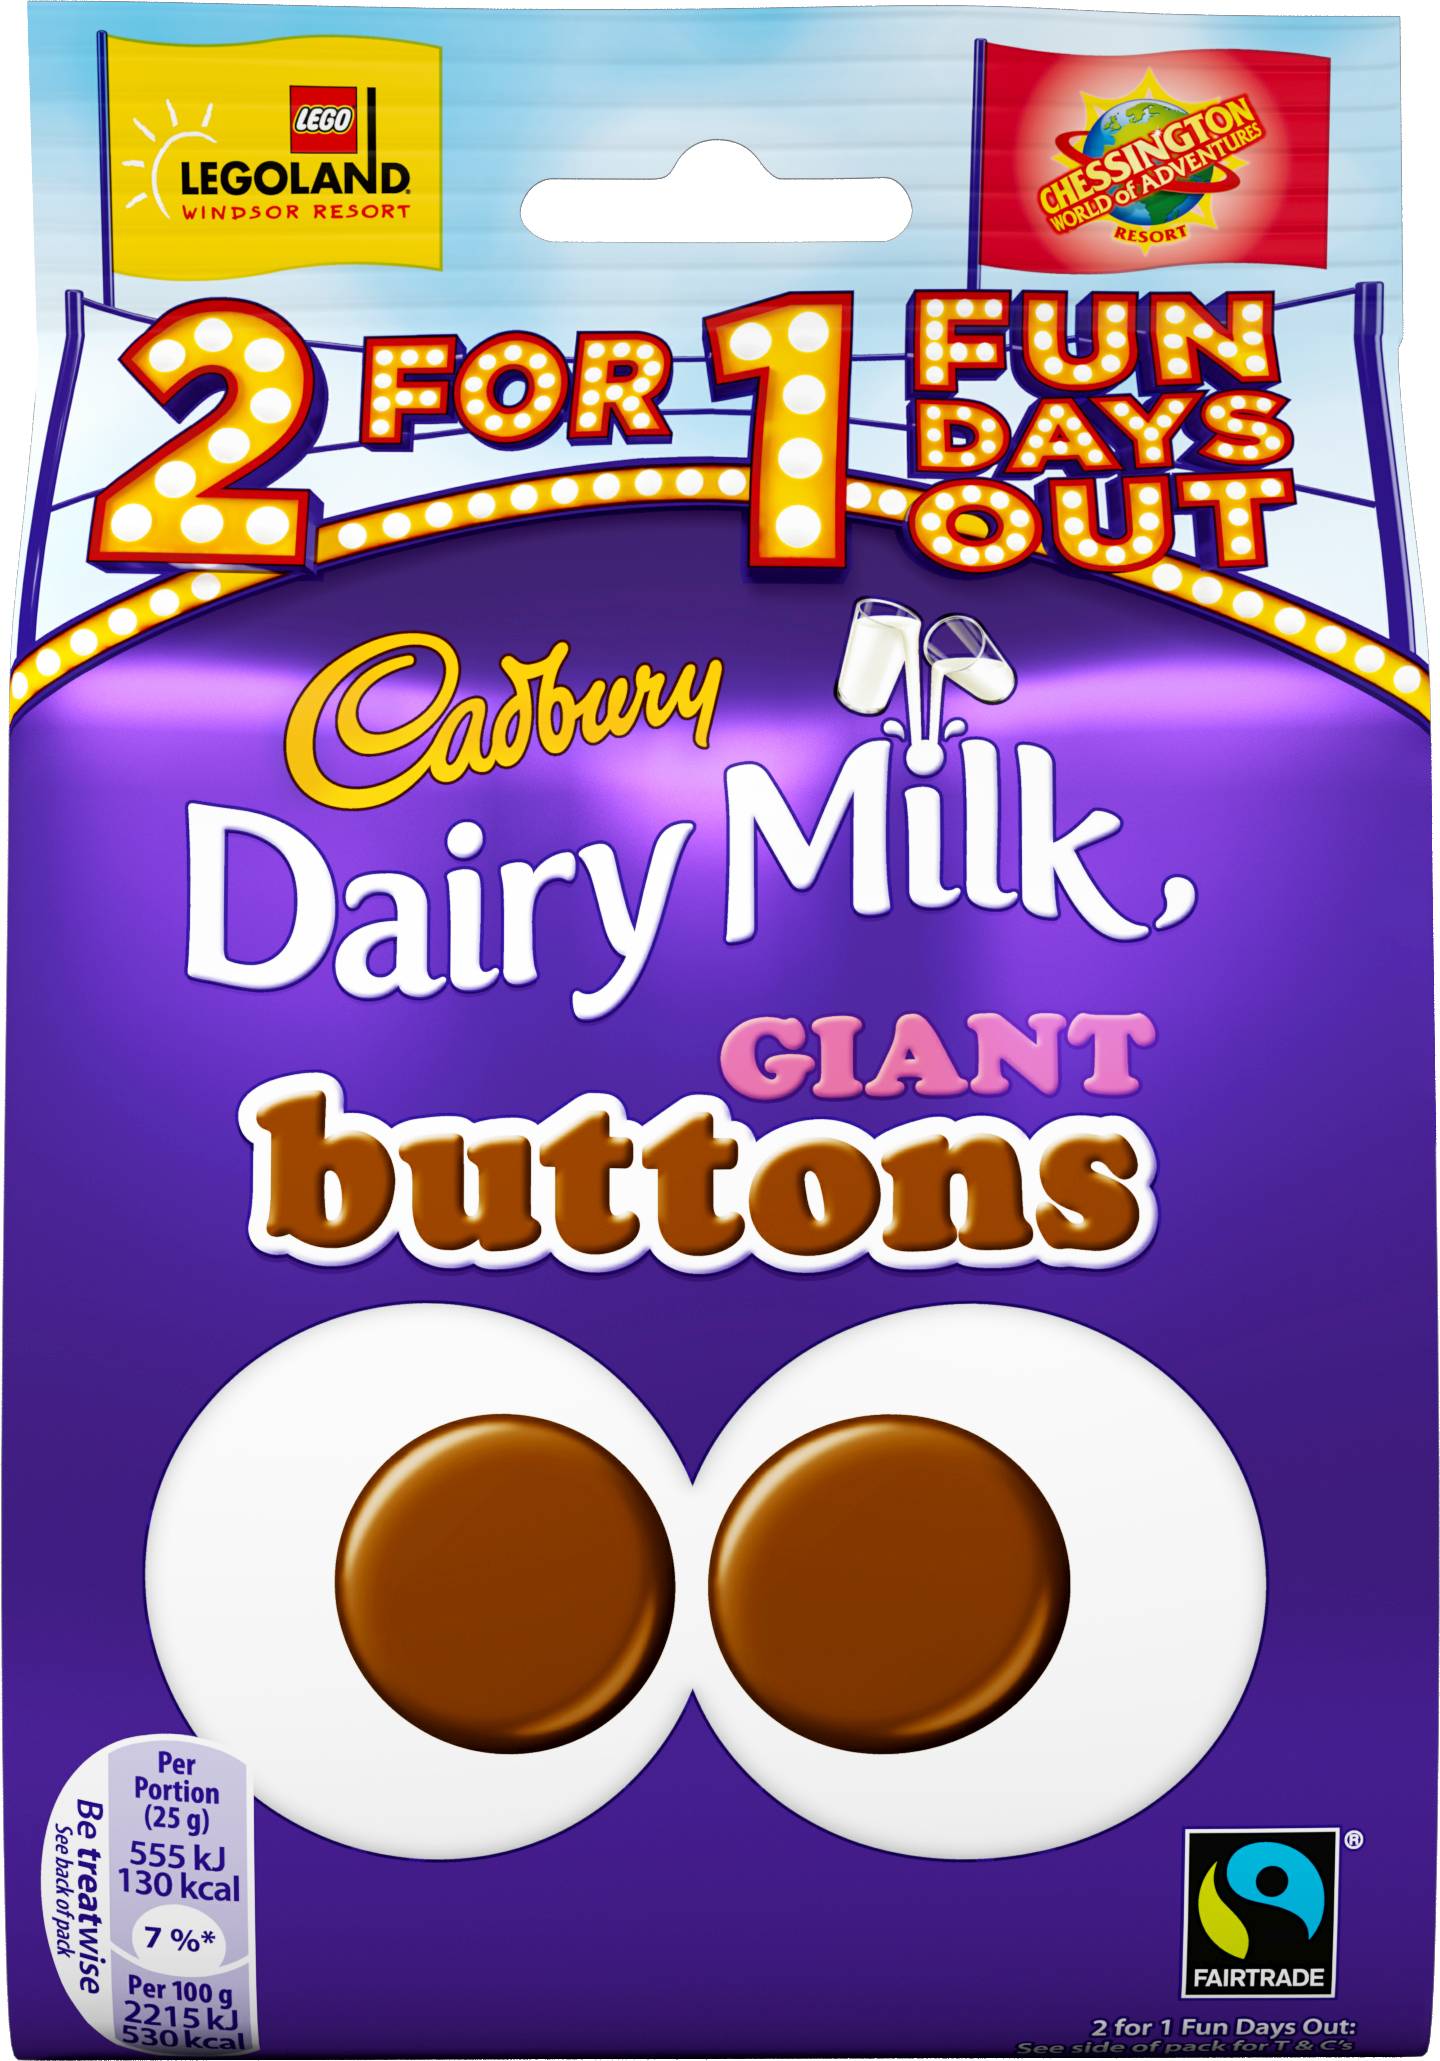 Cadbury announces 2 for 1 Merlin attractions offer